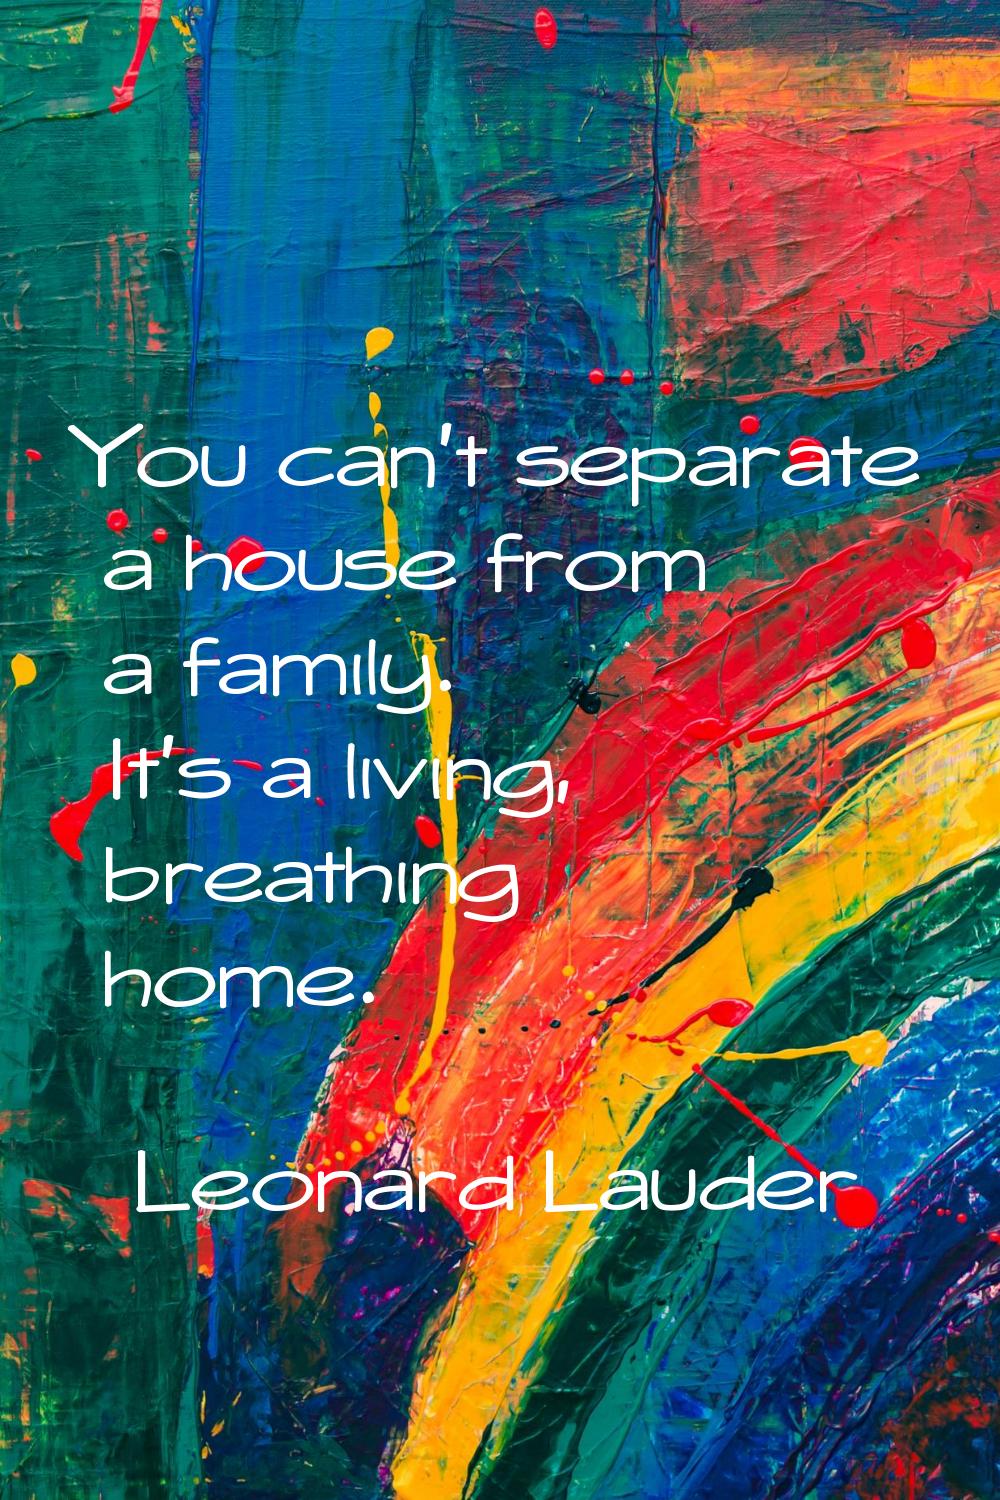 You can't separate a house from a family. It's a living, breathing home.